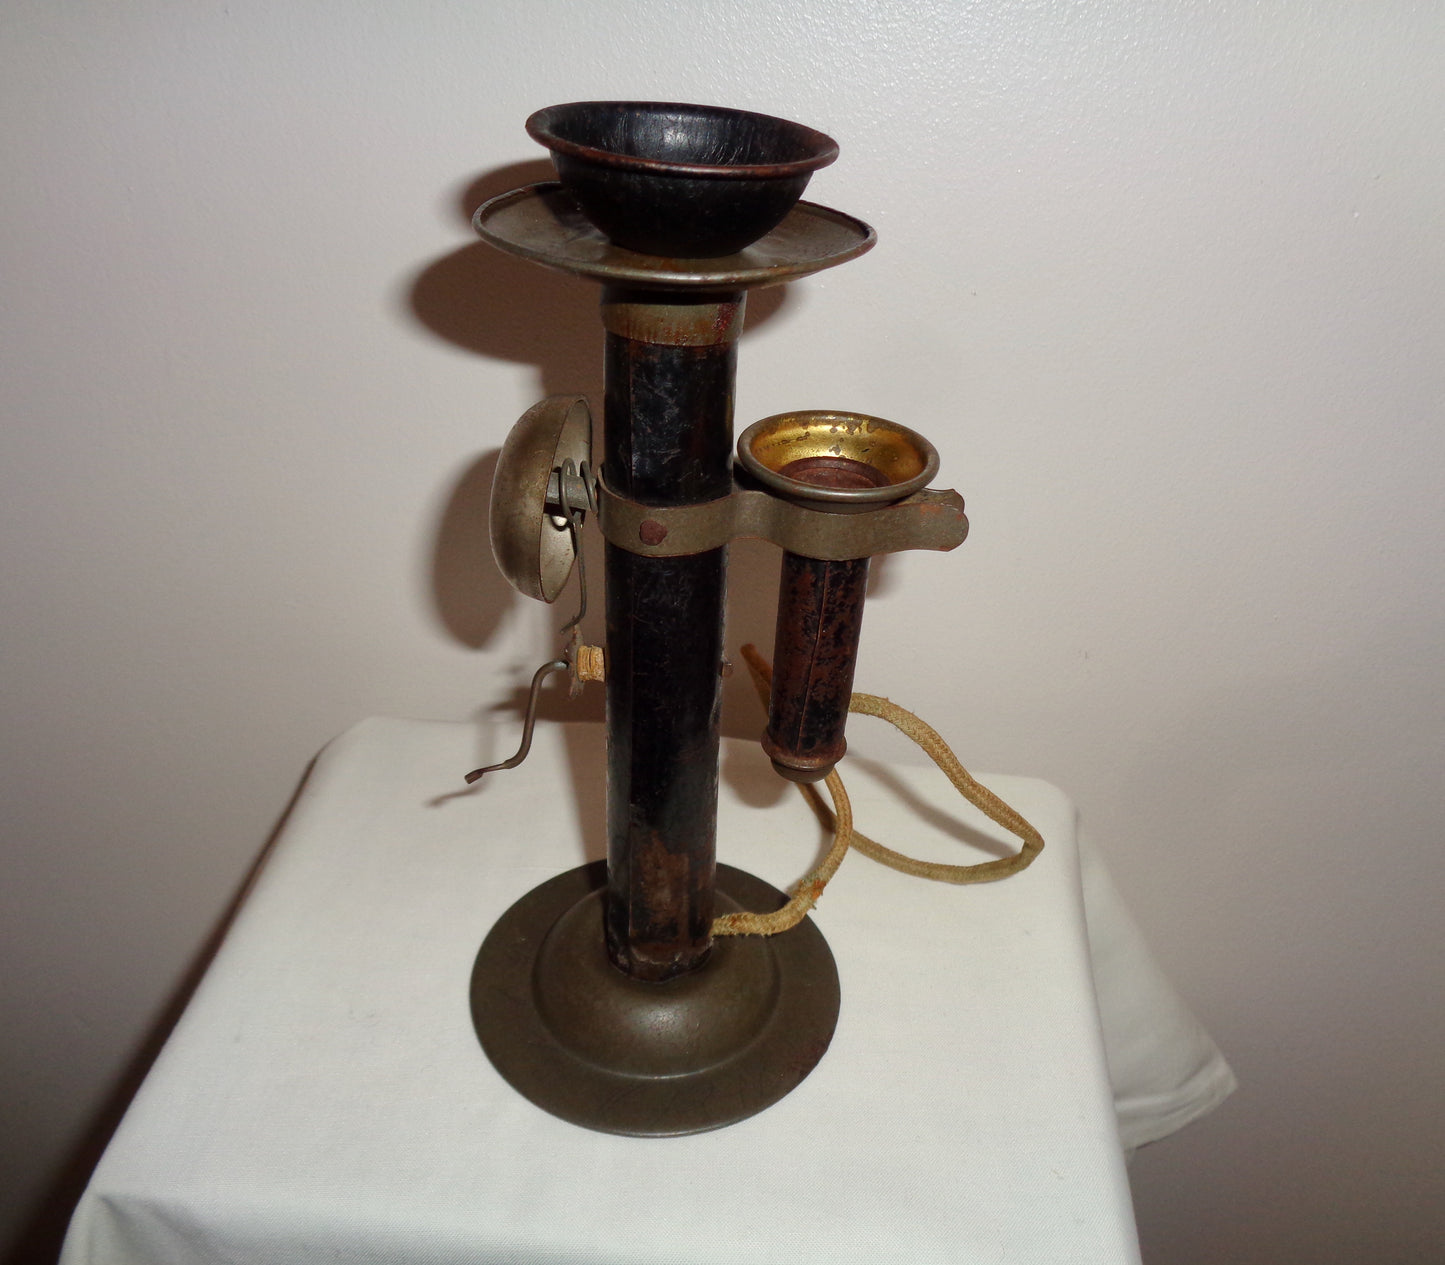 1920s Children's Metal Candlestick Toy Telephone